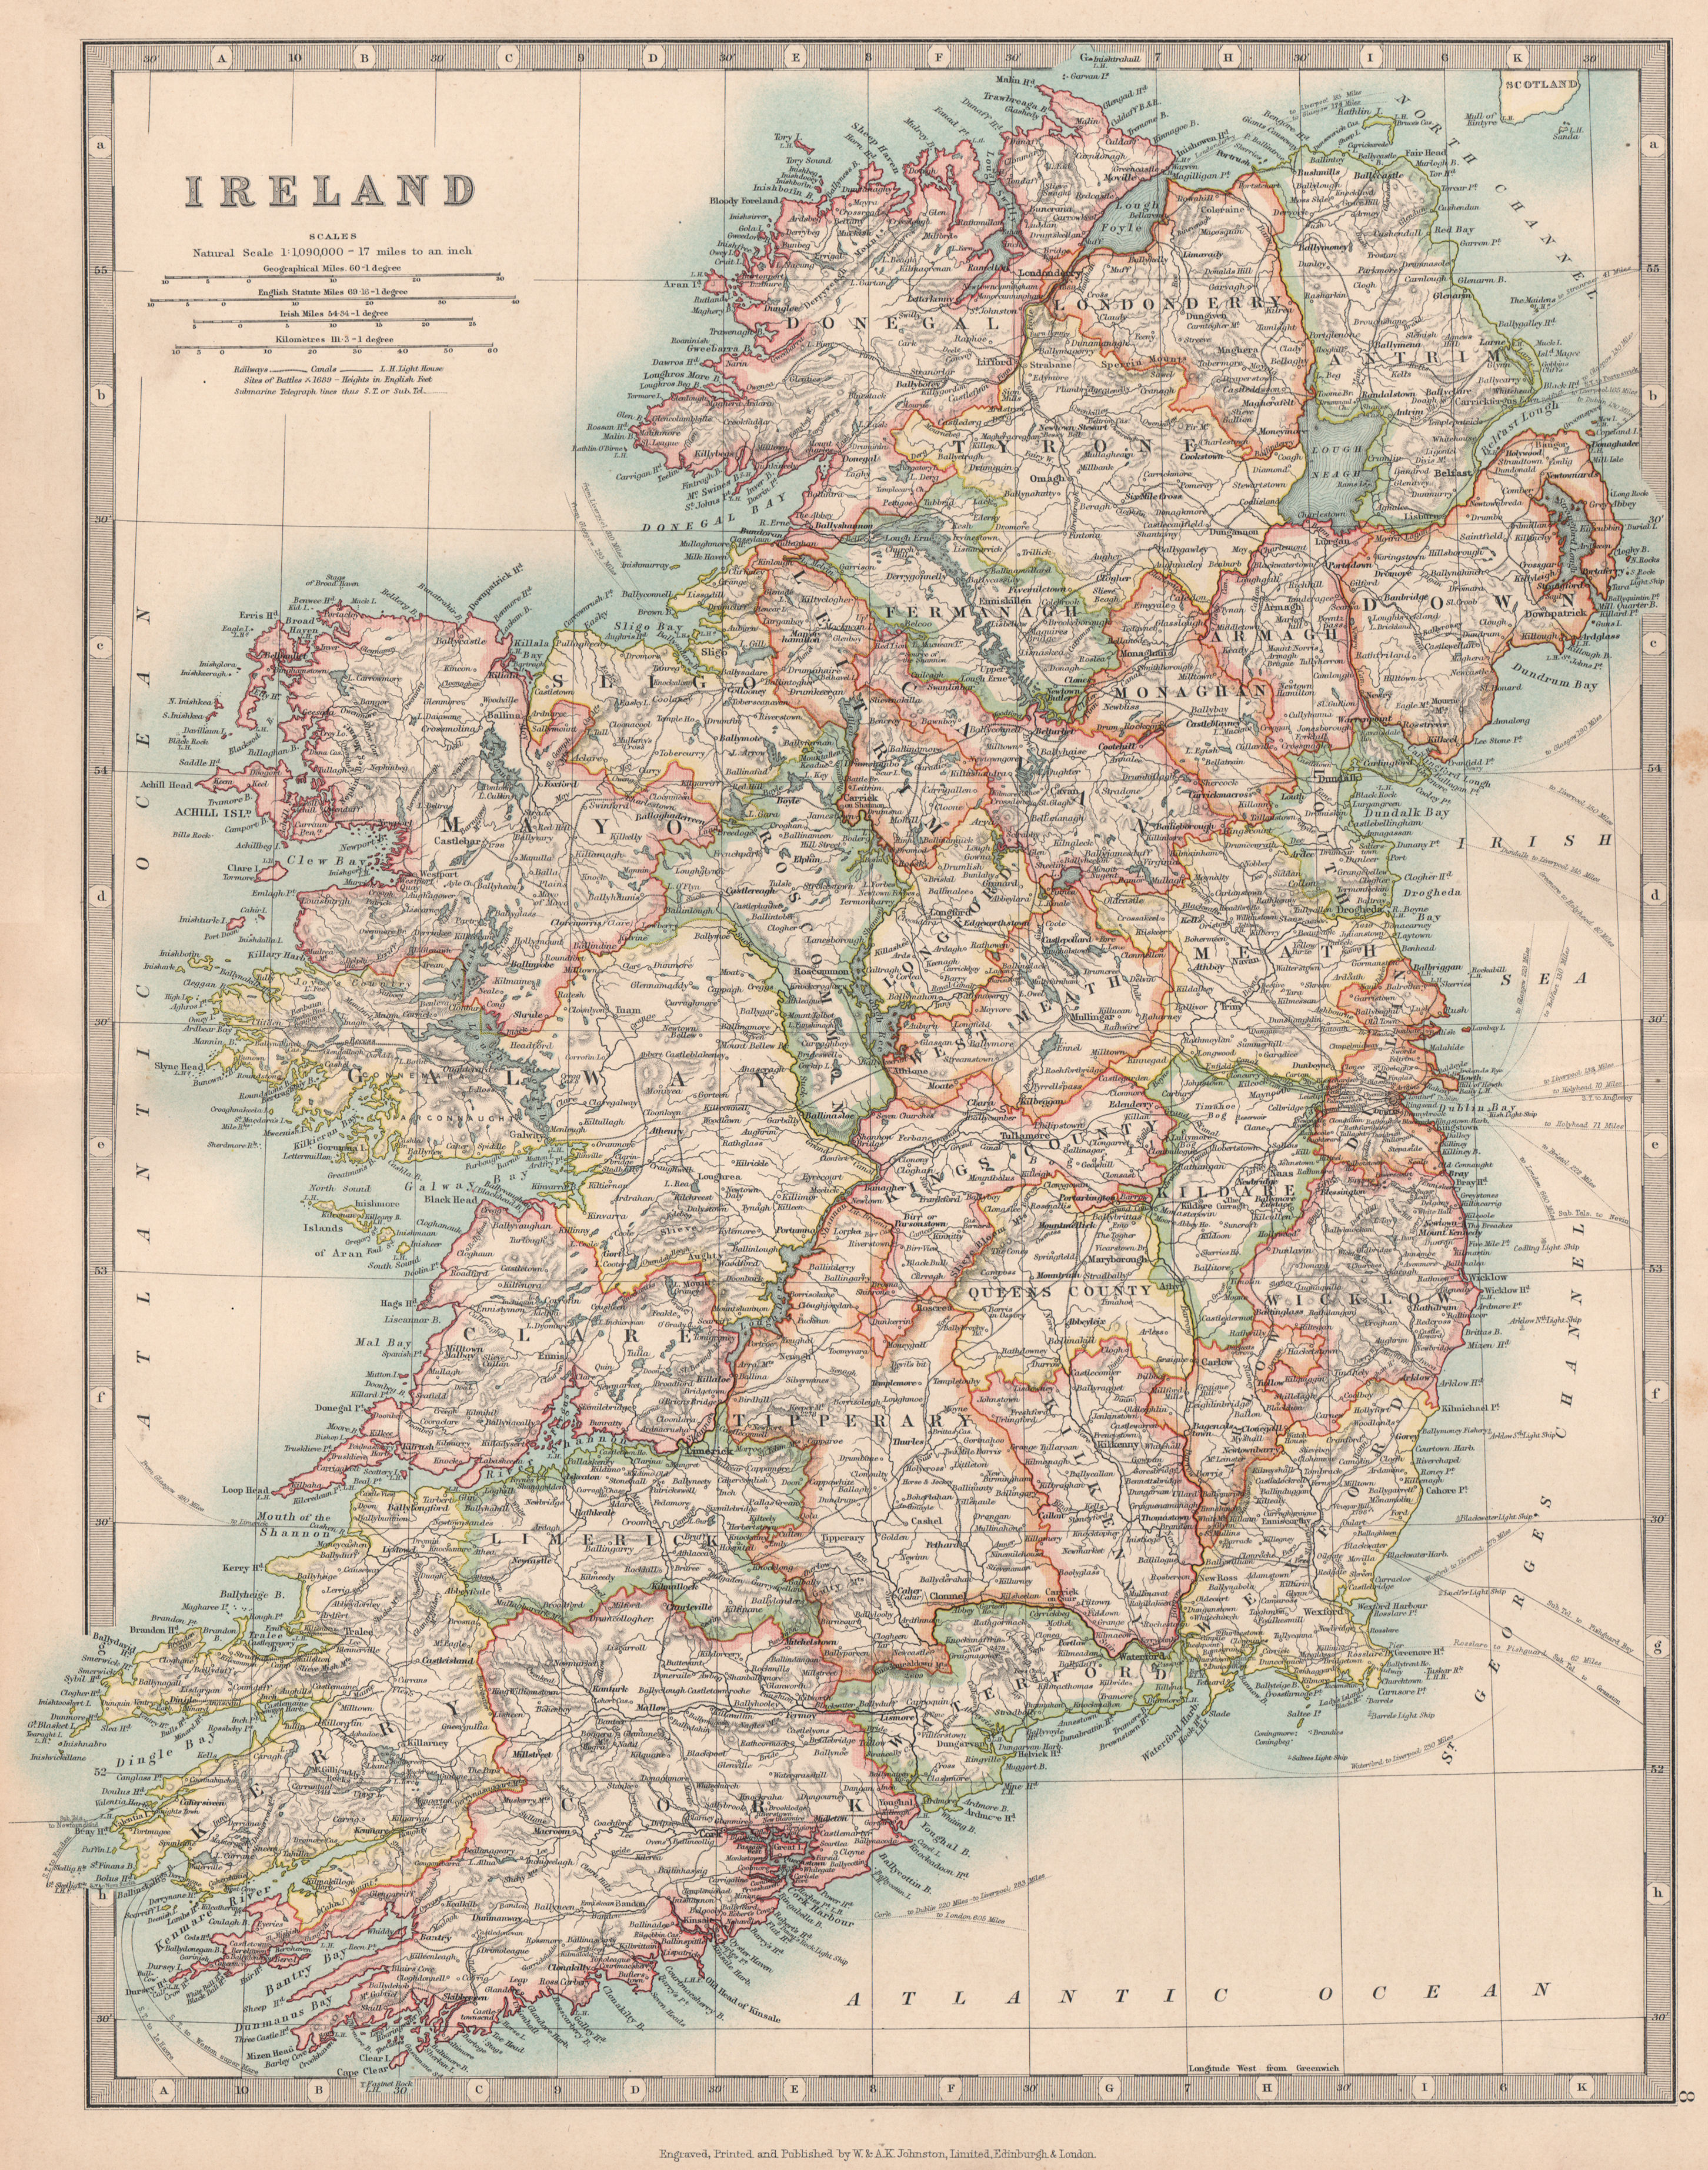 Associate Product IRELAND showing battlefields and dates. JOHNSTON 1912 old antique map chart